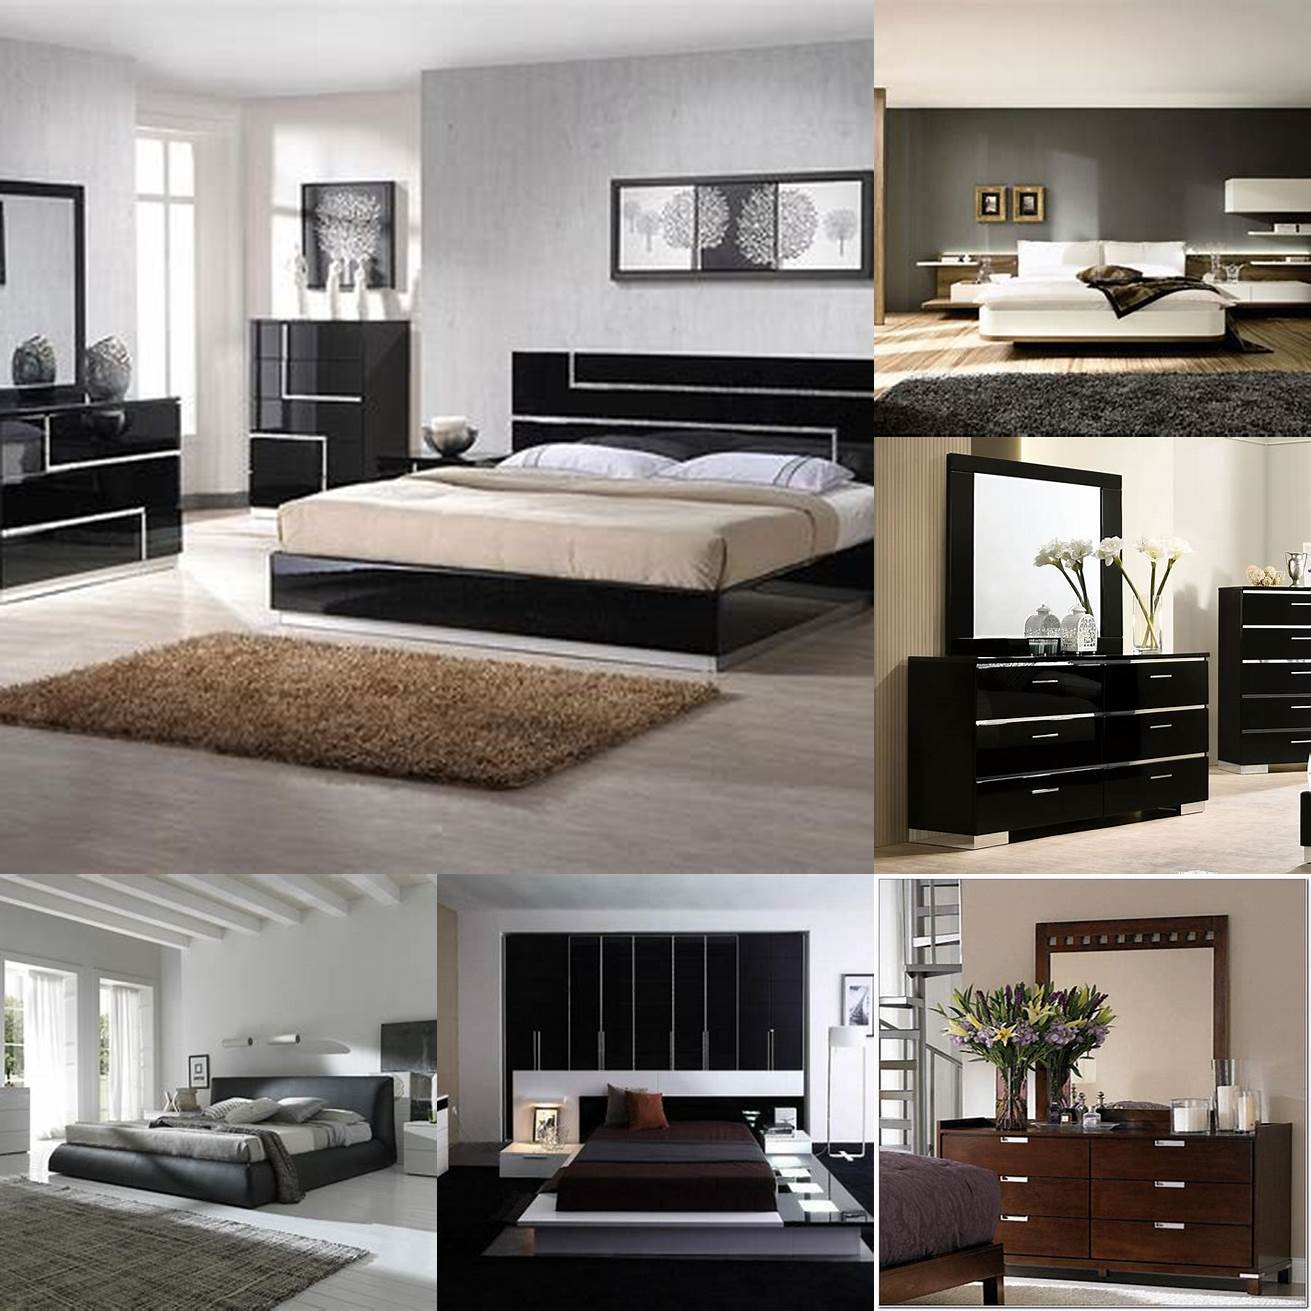 A contemporary bedroom dresser set with modern designs made from materials such as glass or chrome